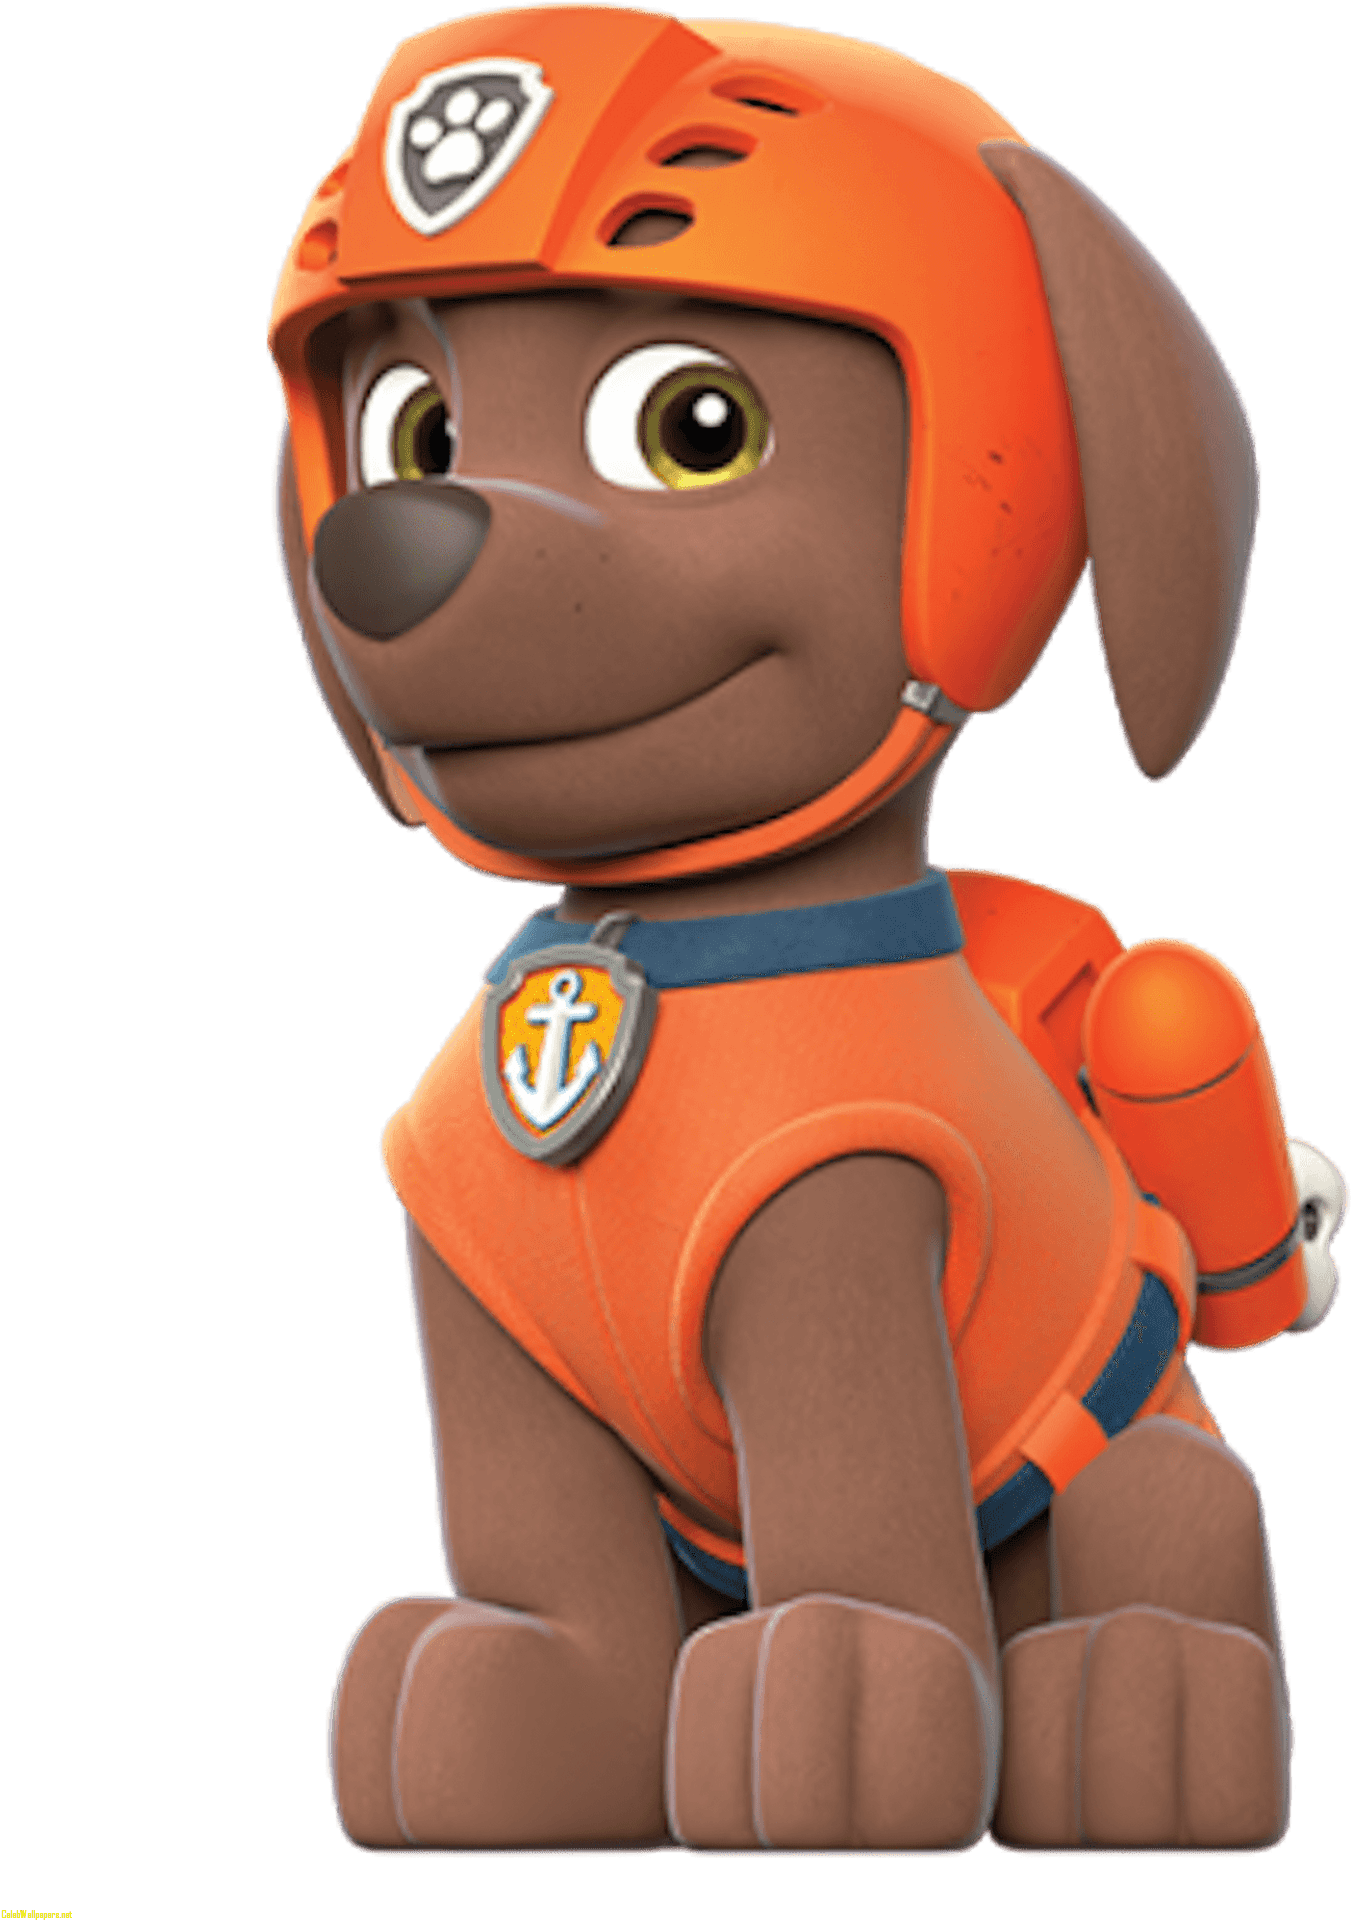 Paw Patrol Zuma Clipart.png PNG image